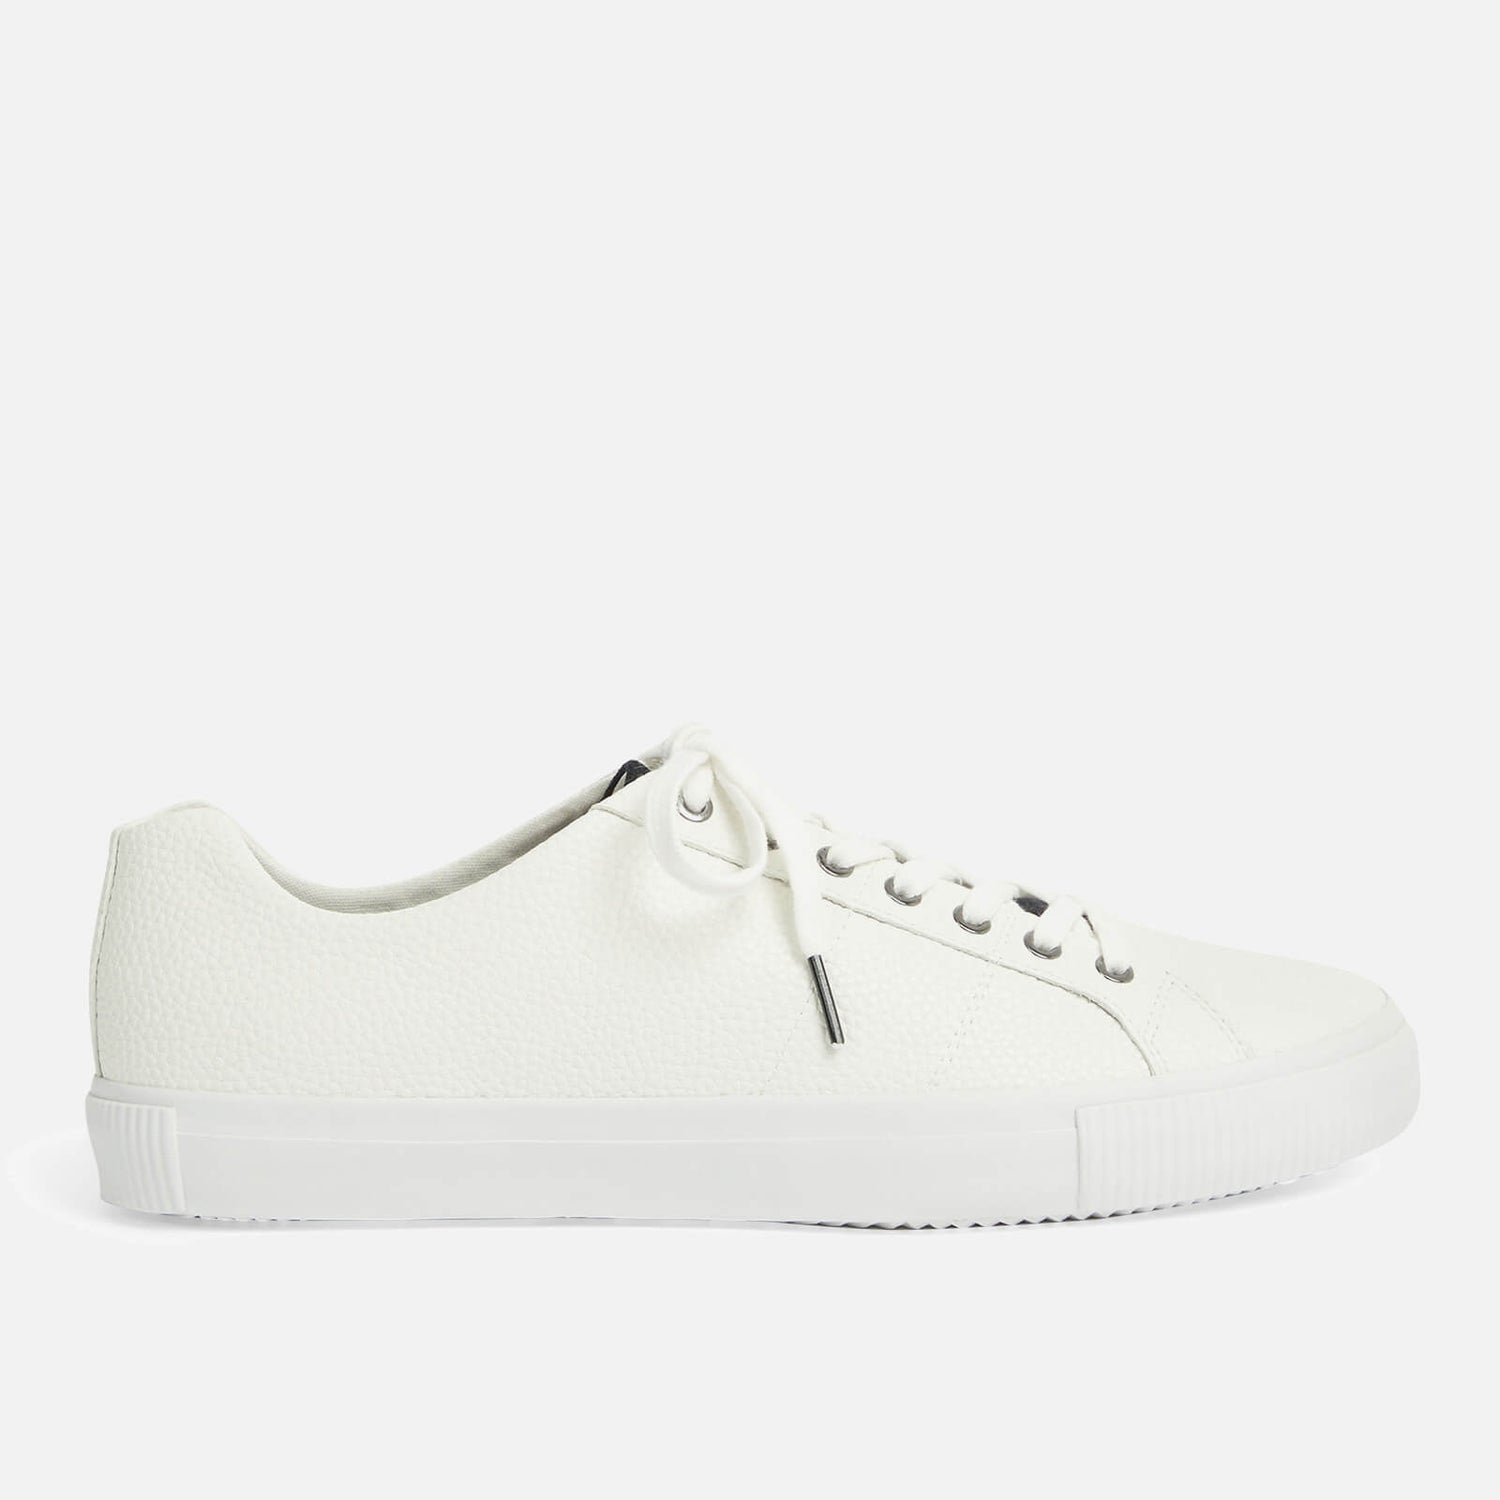 Ted Baker Men's Borage Cupsole Trainers - White